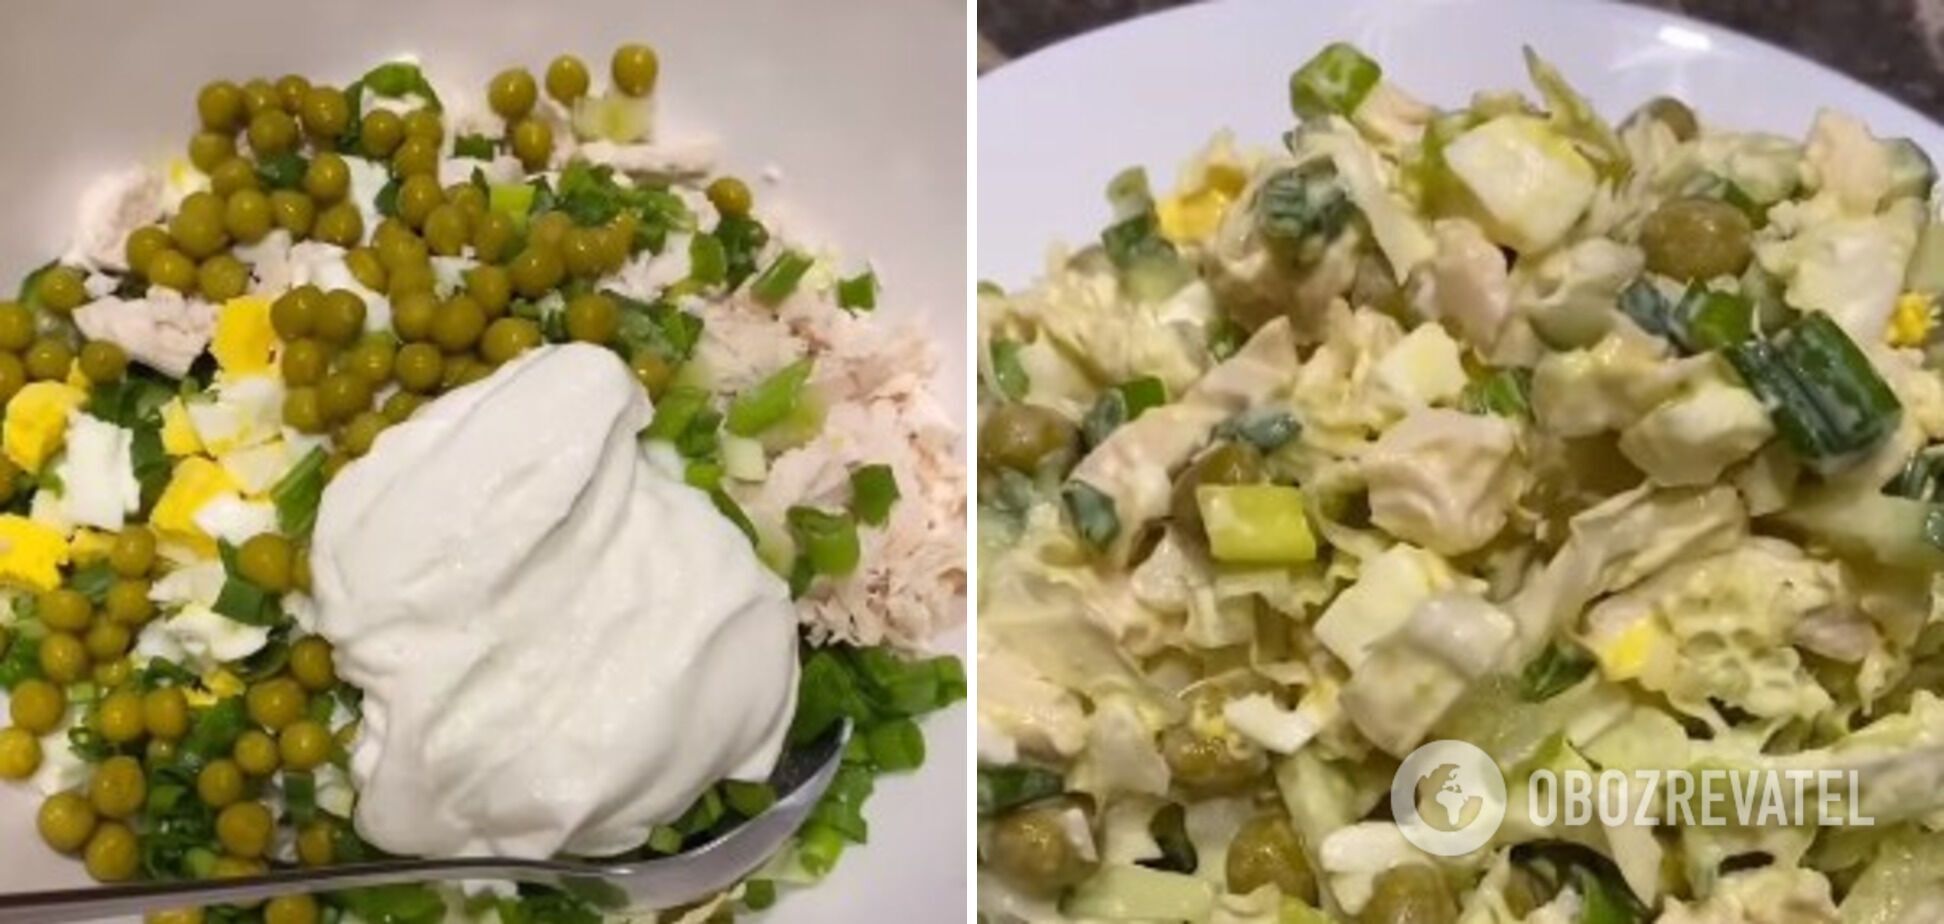 Salad with cabbage and peas